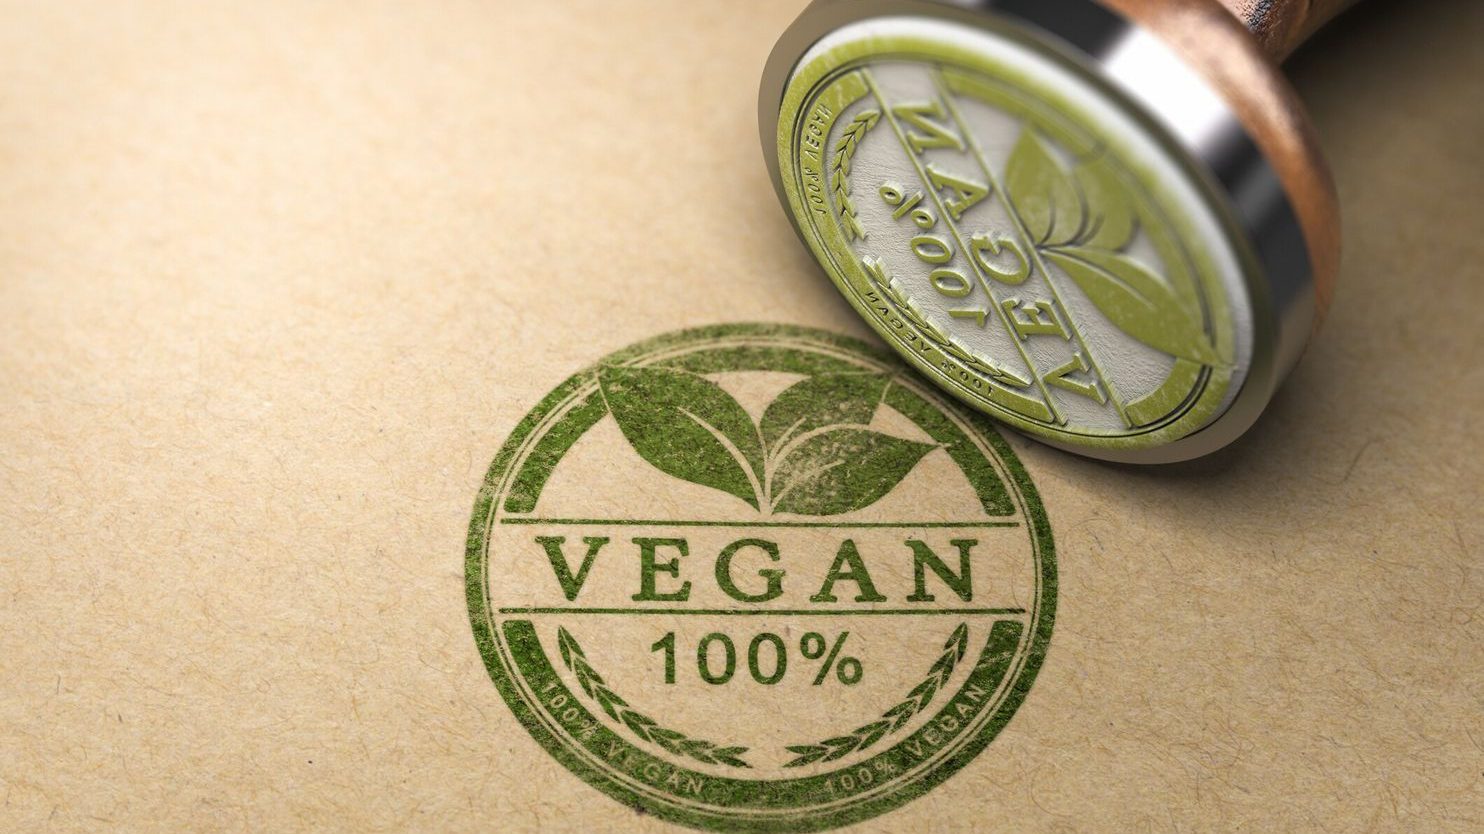 Veganism is much more than a plant-based lifestyle